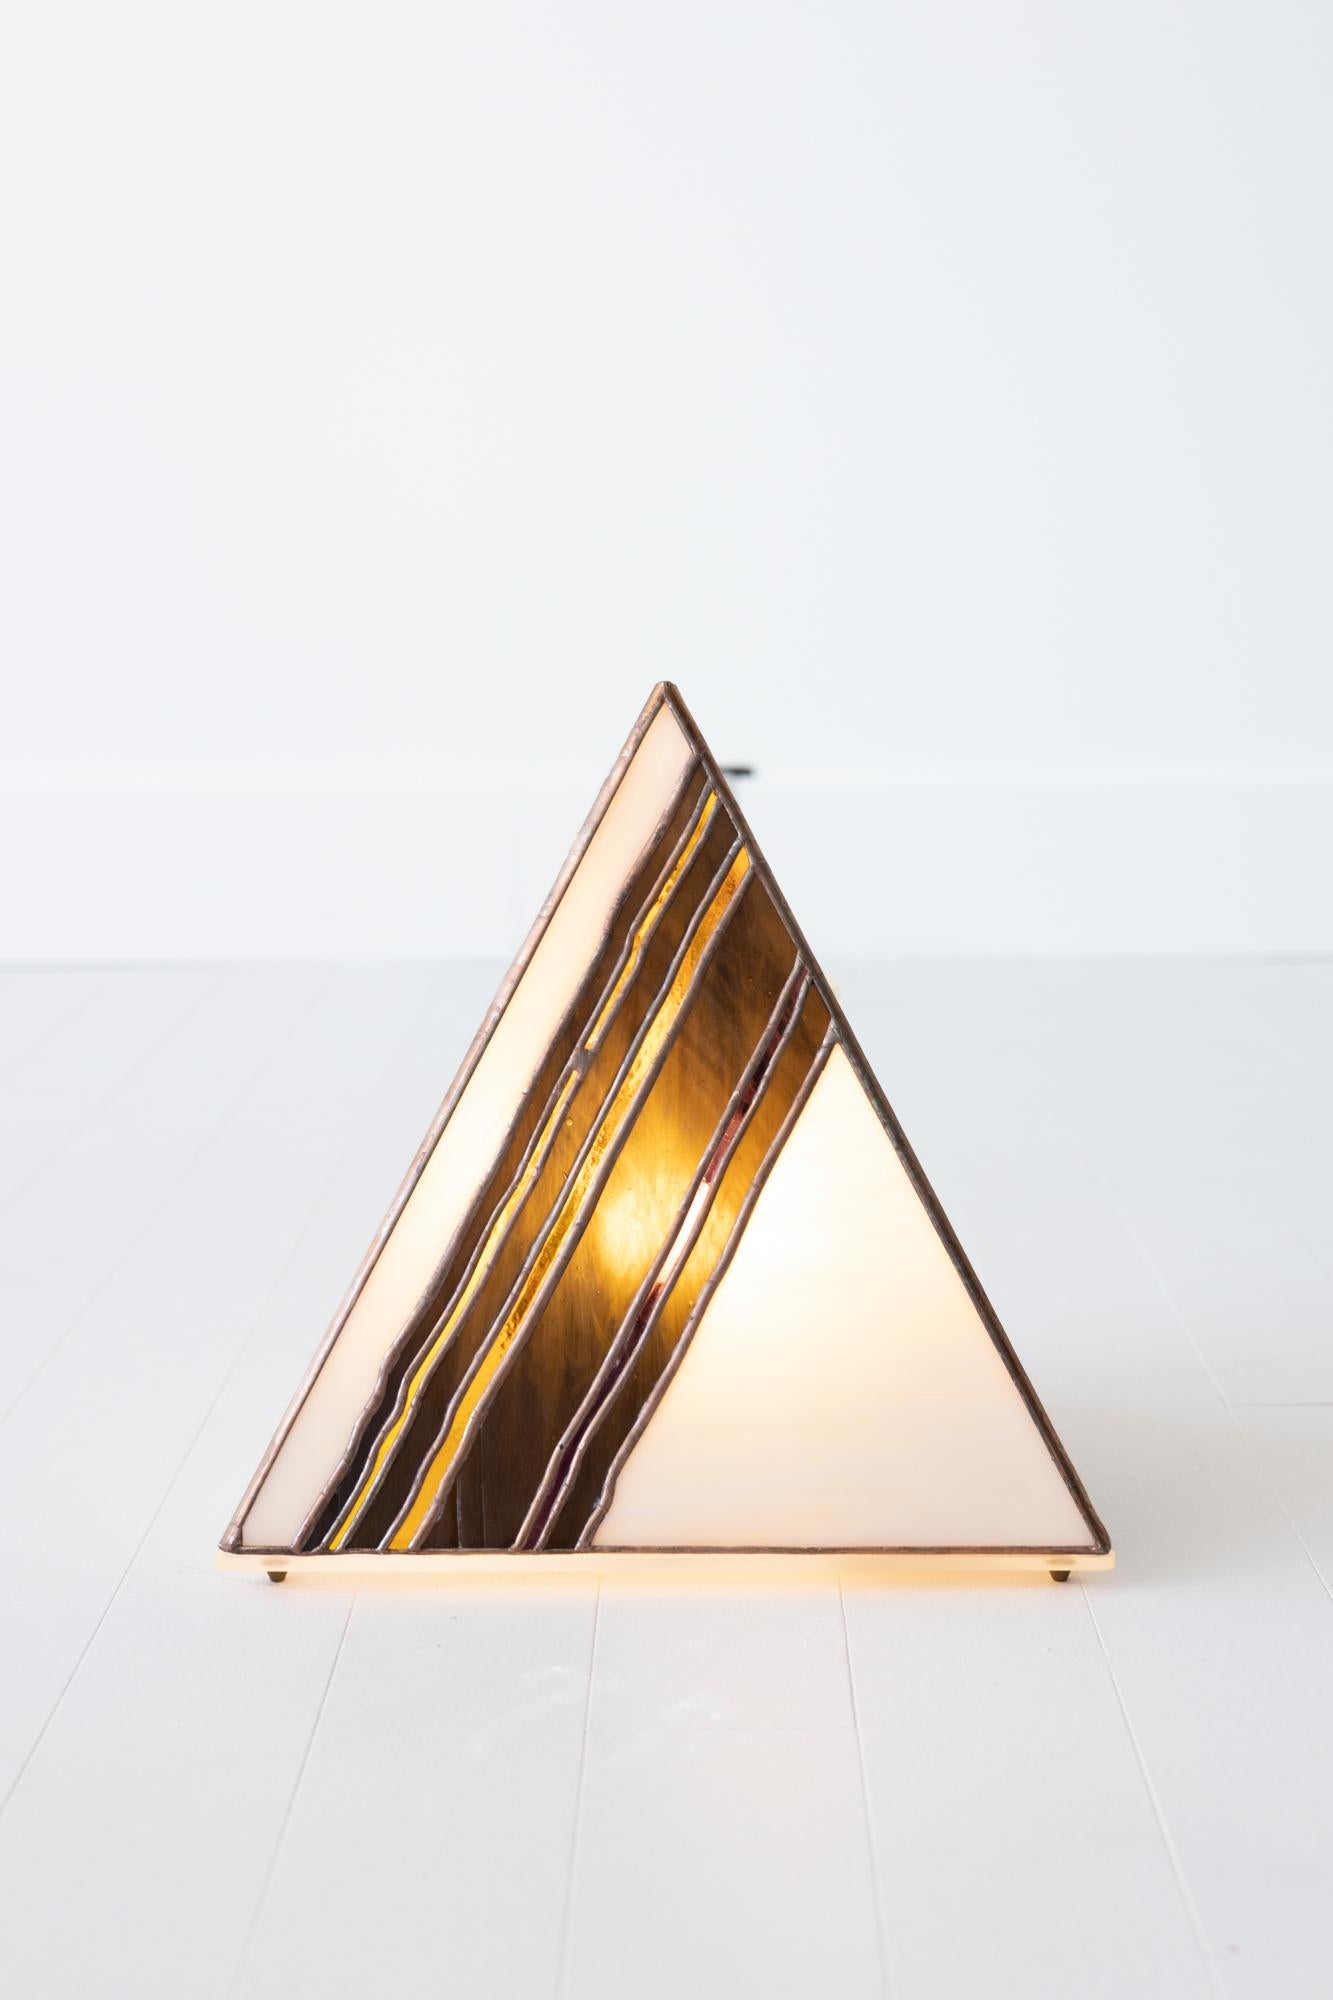 Jason Andrew Turner Abstract Sculpture - "Brushstroke Pyramid Lamp" Handcrafted stained glass, abstract brushstroke motif